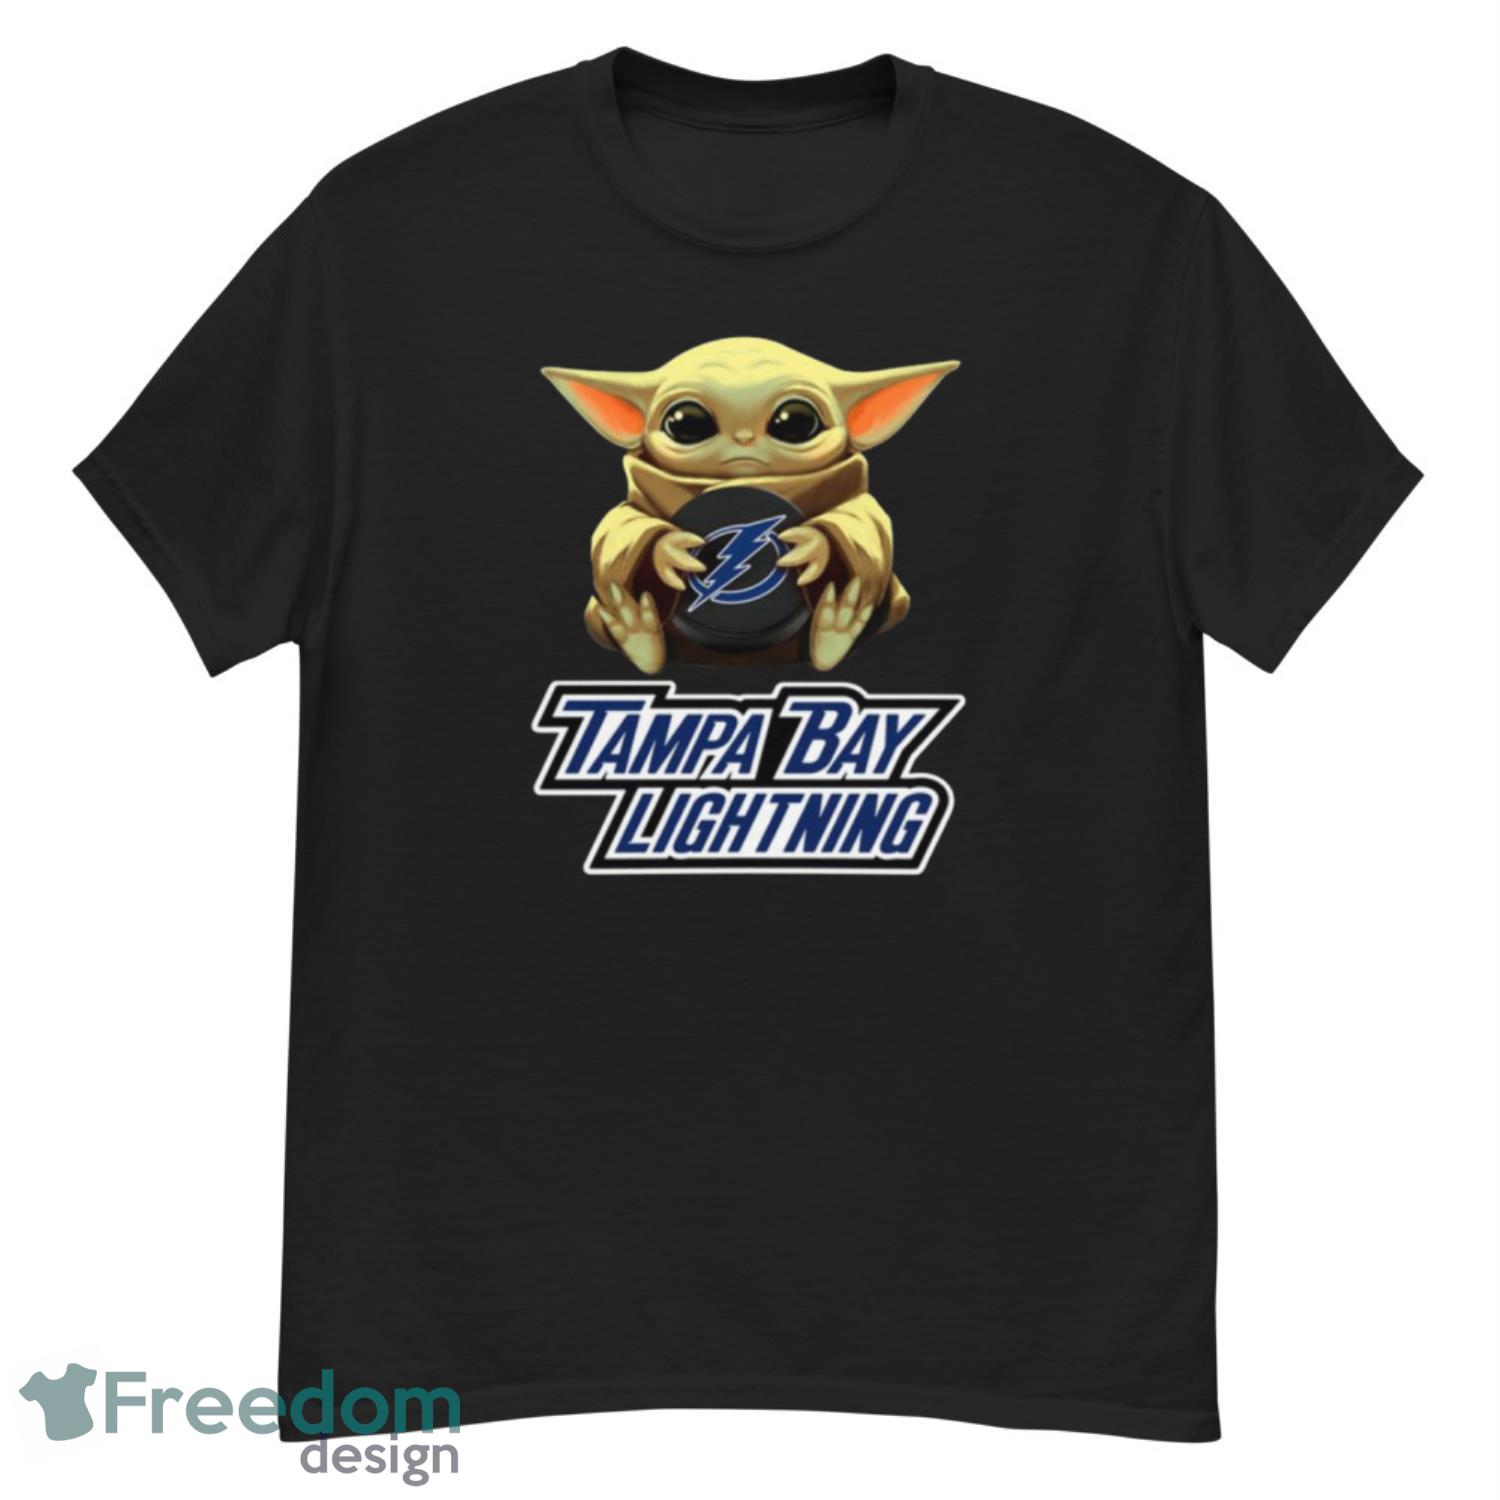  Pets First NHL Toronto Maple Leafs Tee Shirt for Dogs & Cats,  X-Small. - are You A Hockey Fan? Let Your Pet Be an NHL Fan Too! : Pet  Supplies